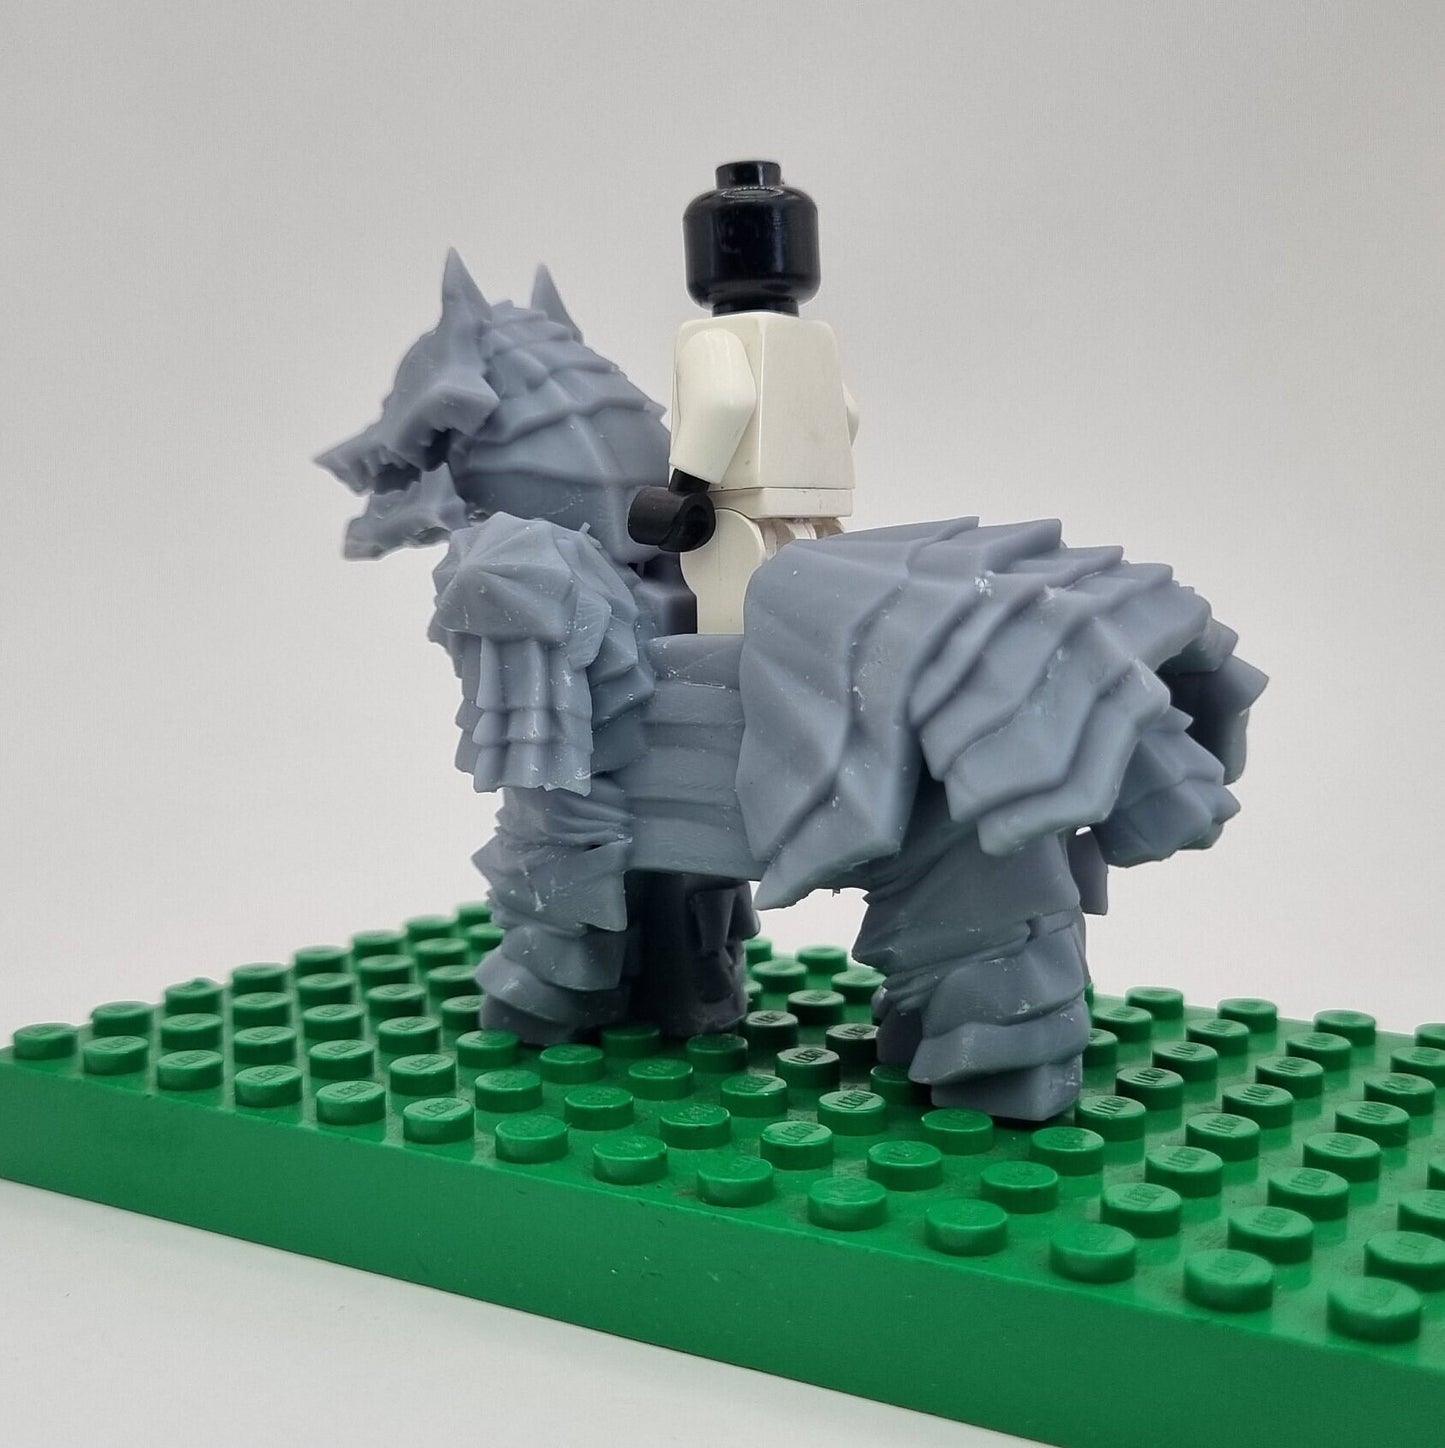 Building toy custom 3D printed armored horse!